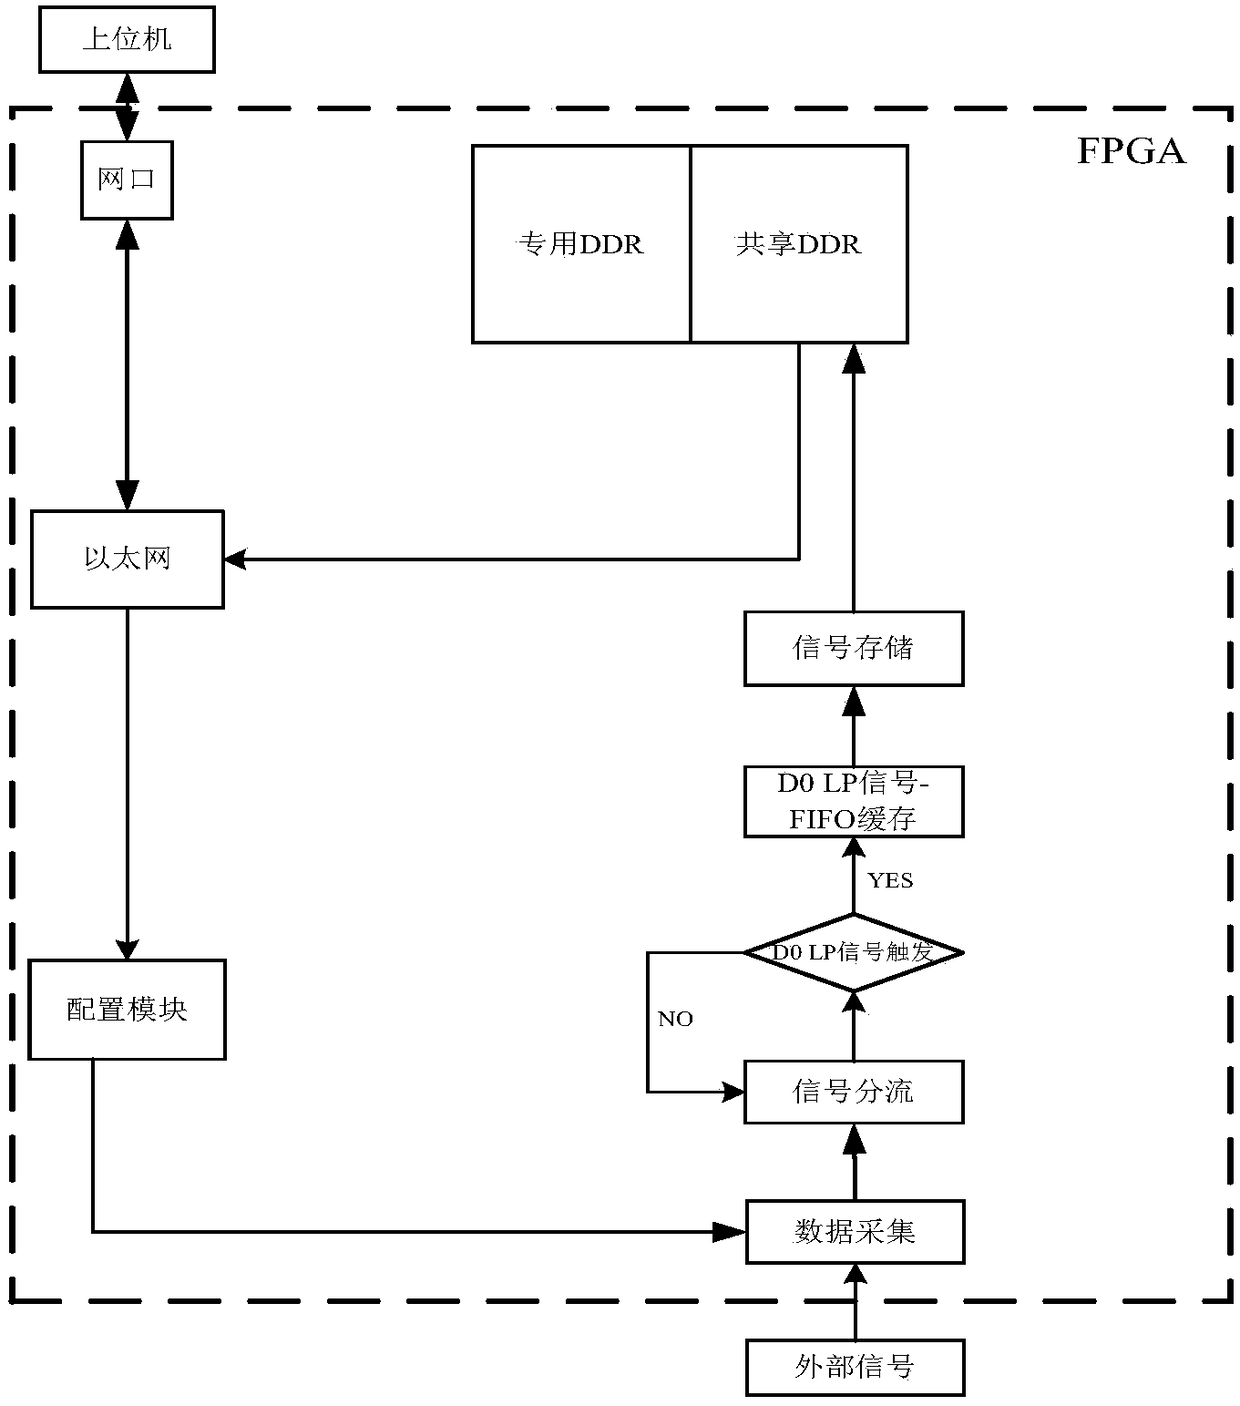 A mipi LP signal testing system and method